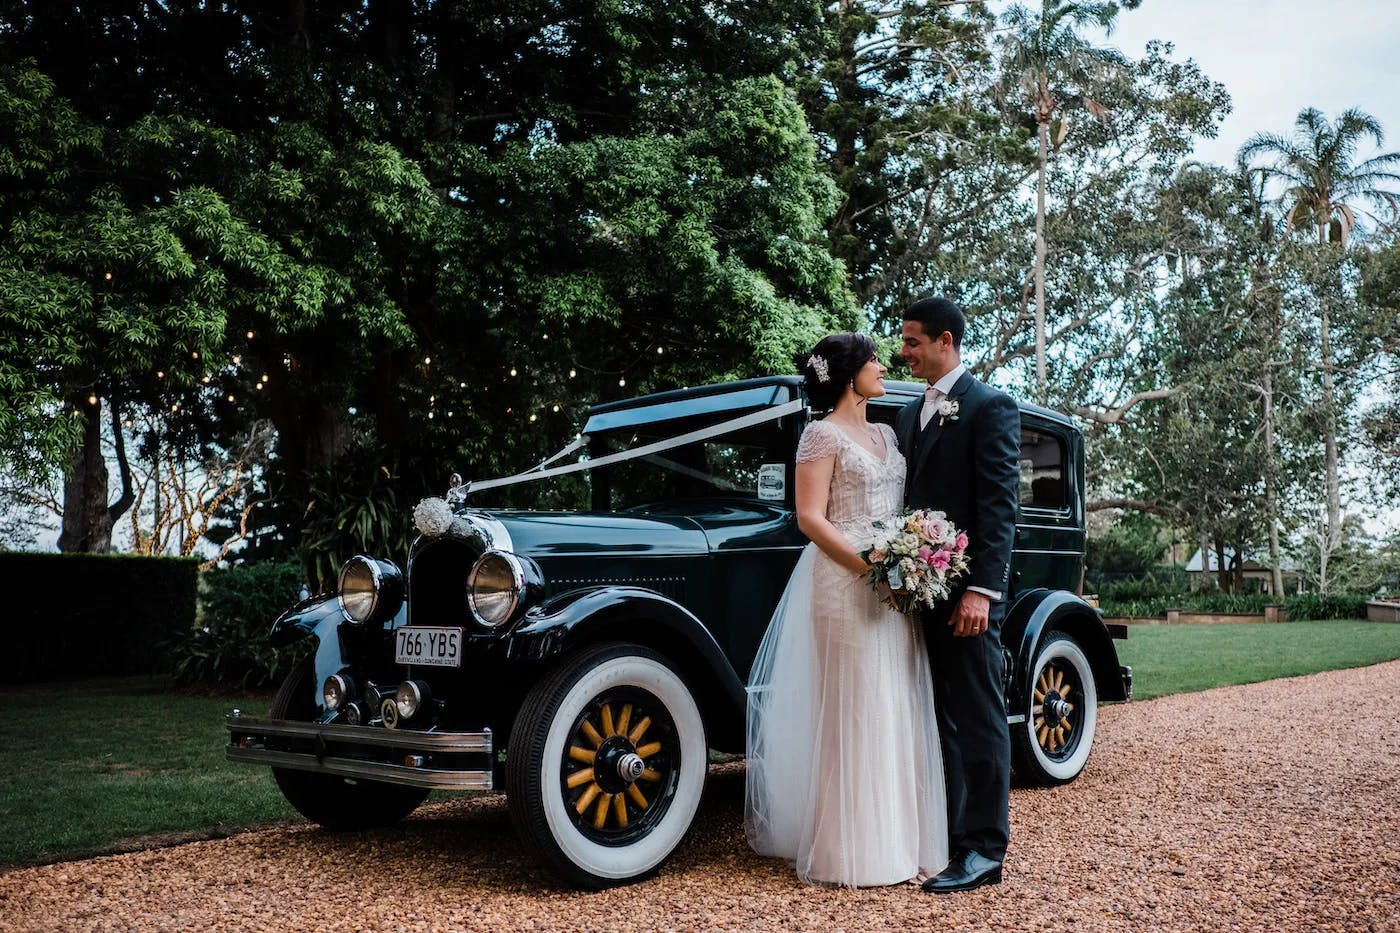 A bride in a white dress and groom in a dark suit stand beside a vintage black car adorned with ribbons and flowers. They are outdoors in a lush, tree-filled setting with a gravel path. The bride holds a bouquet, and they look at each other lovingly.